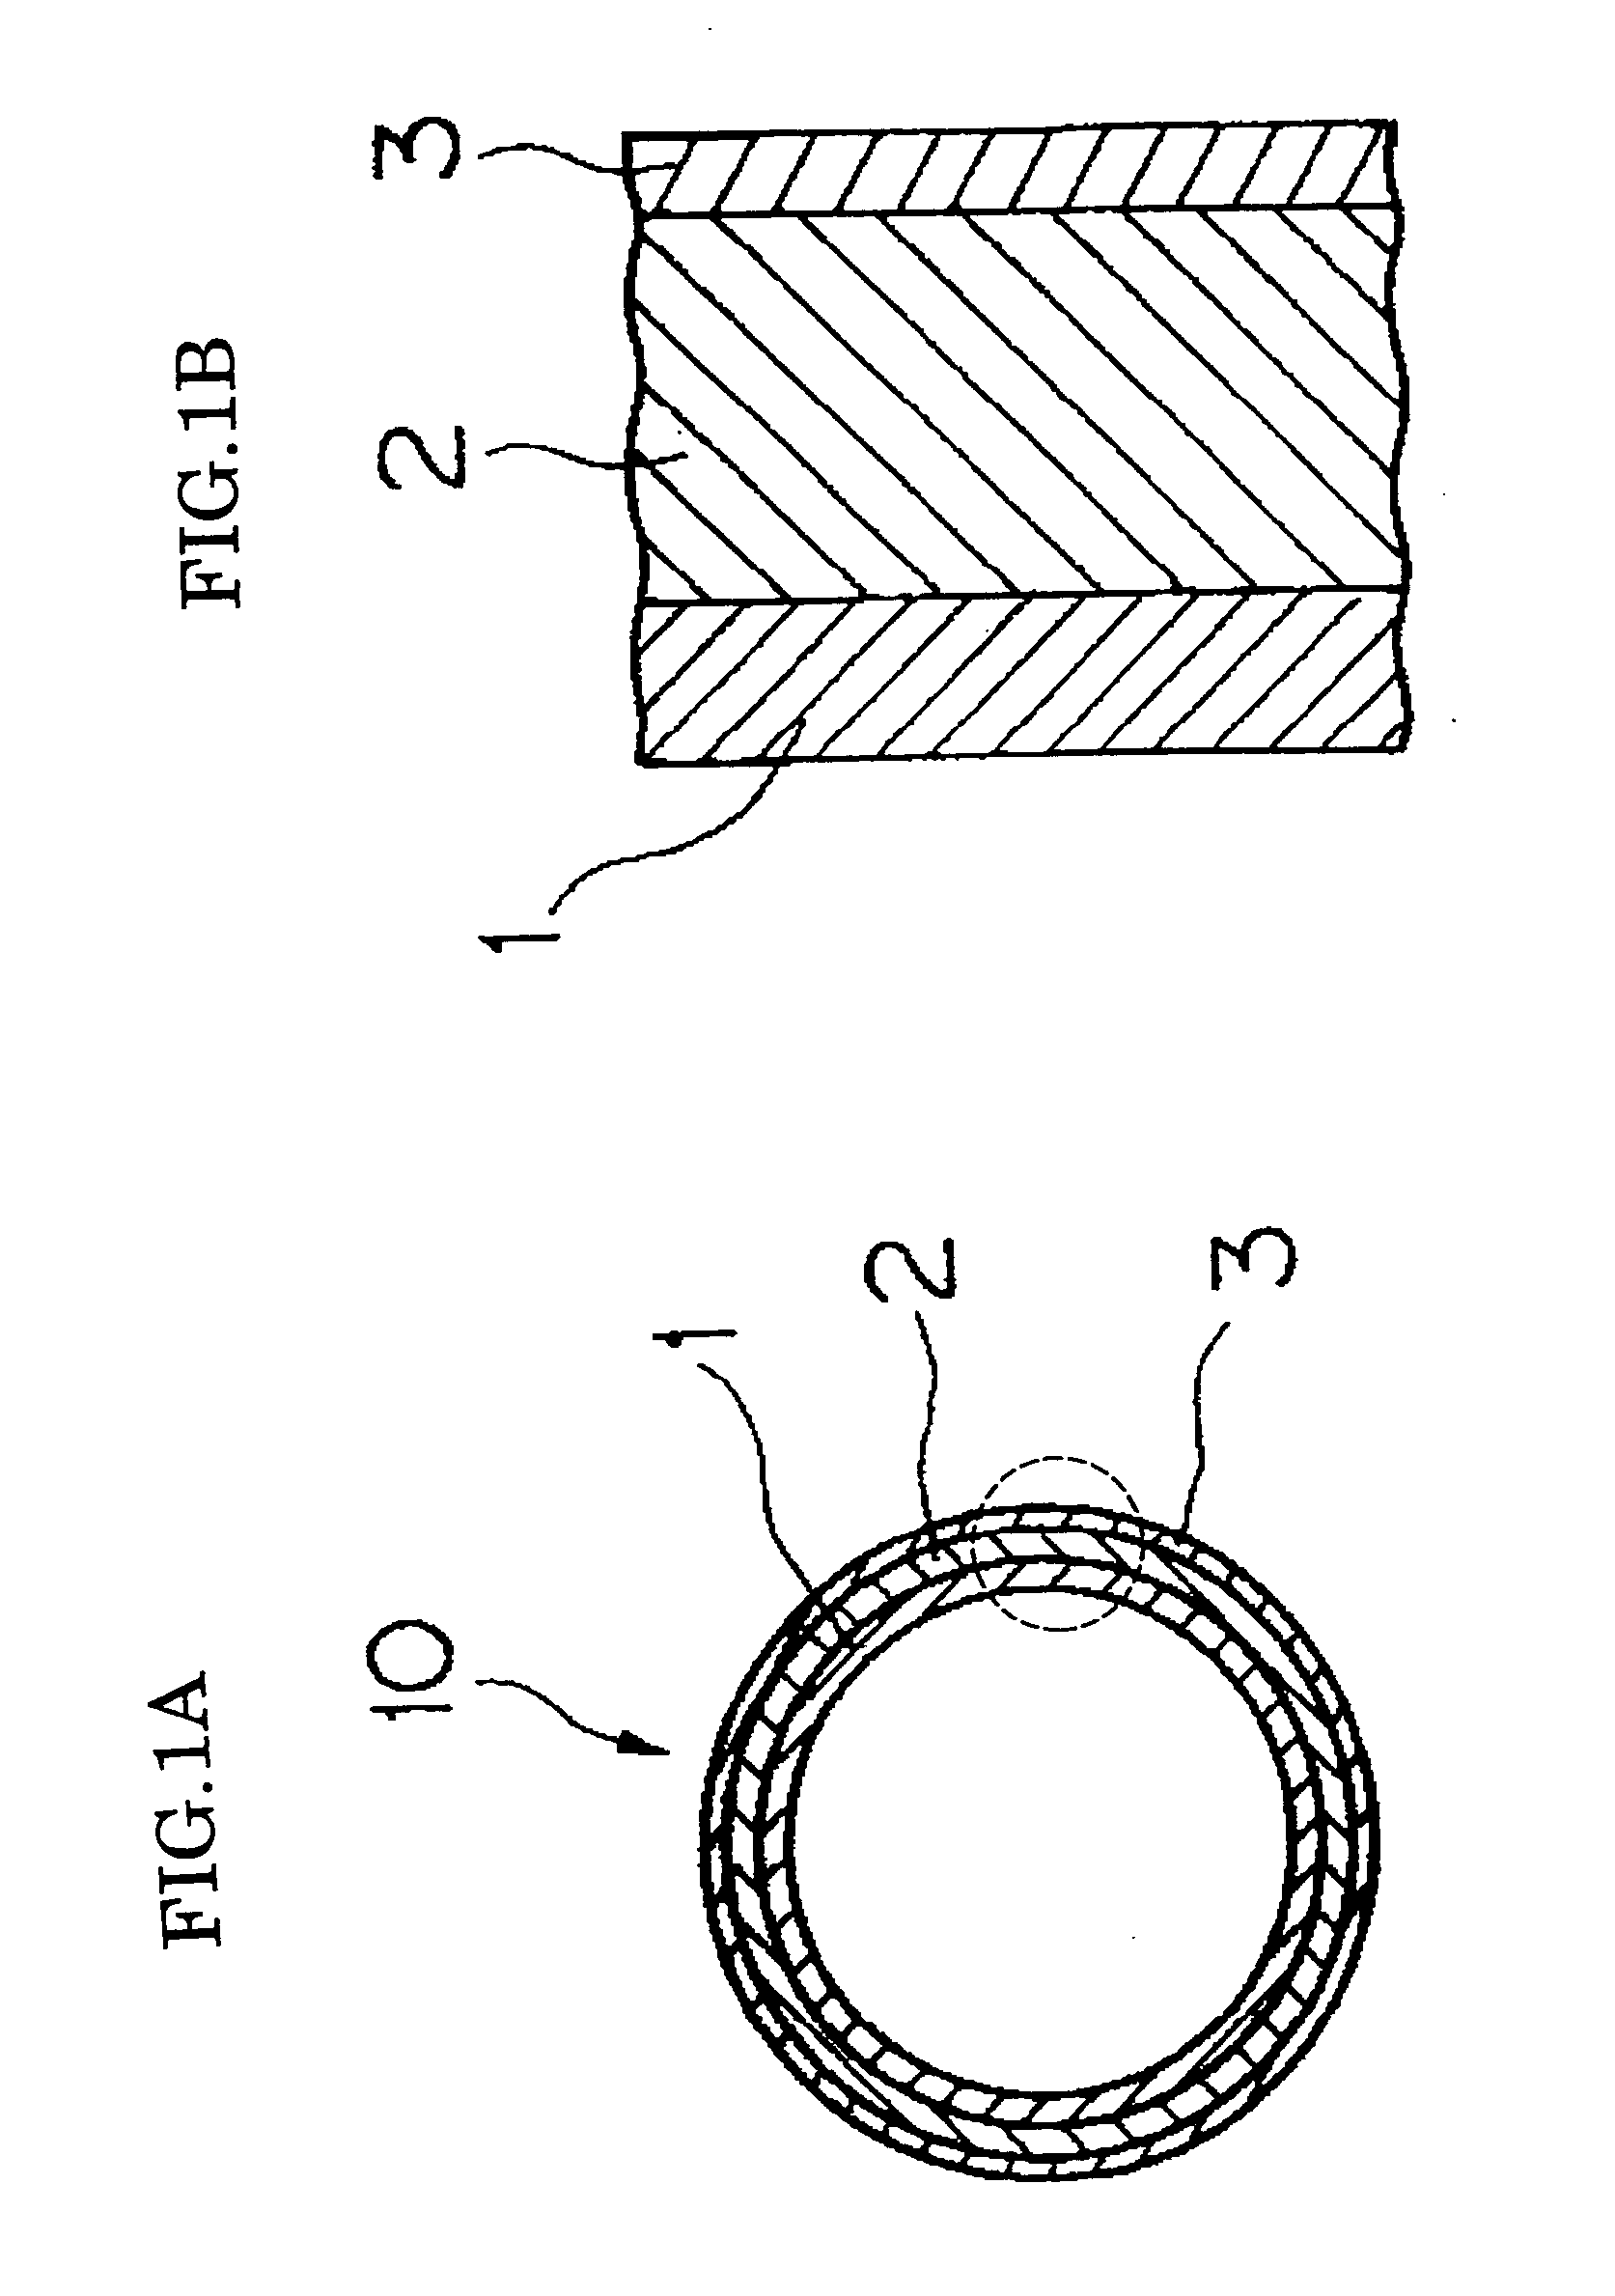 Fixing member, method for producing it, and image forming apparatus comprising the fixing member